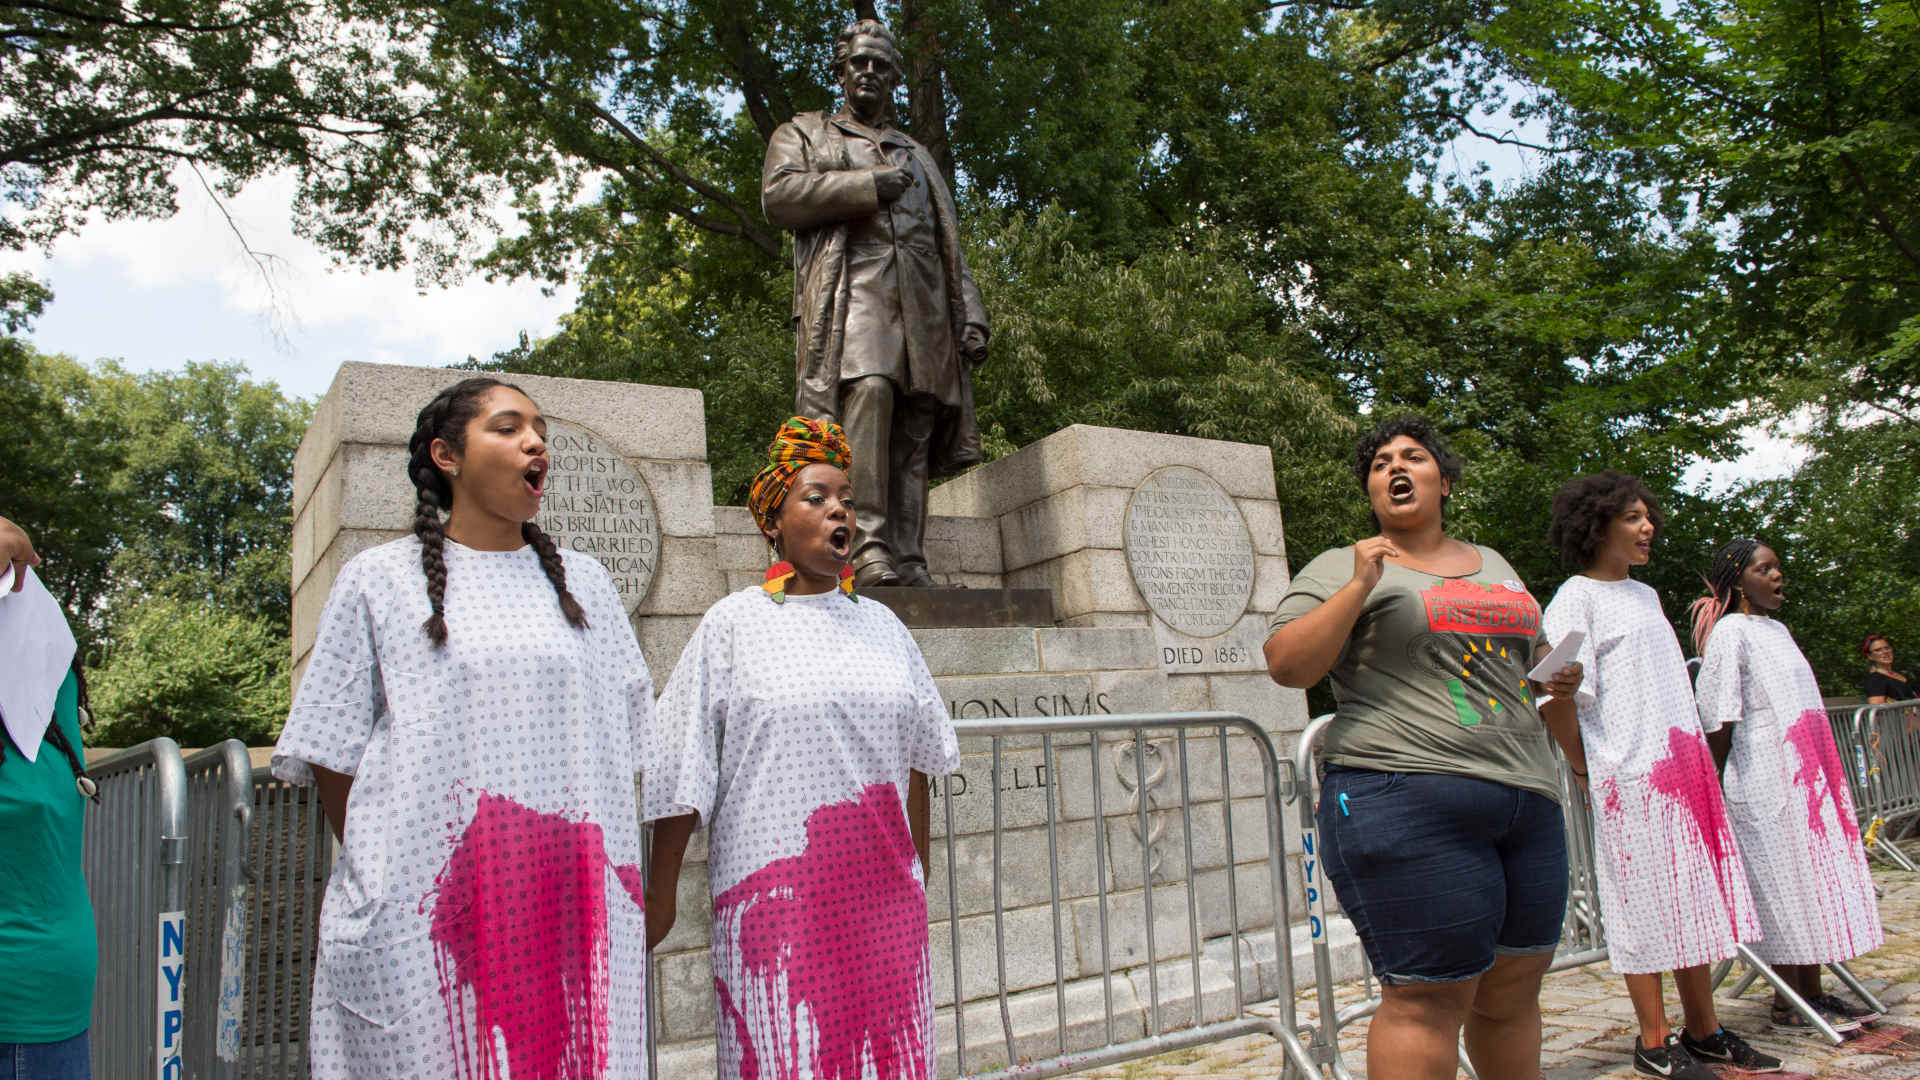 A rally advocating for the removal of statue of J. Marion Sims in Manhattan, New York, 2017.